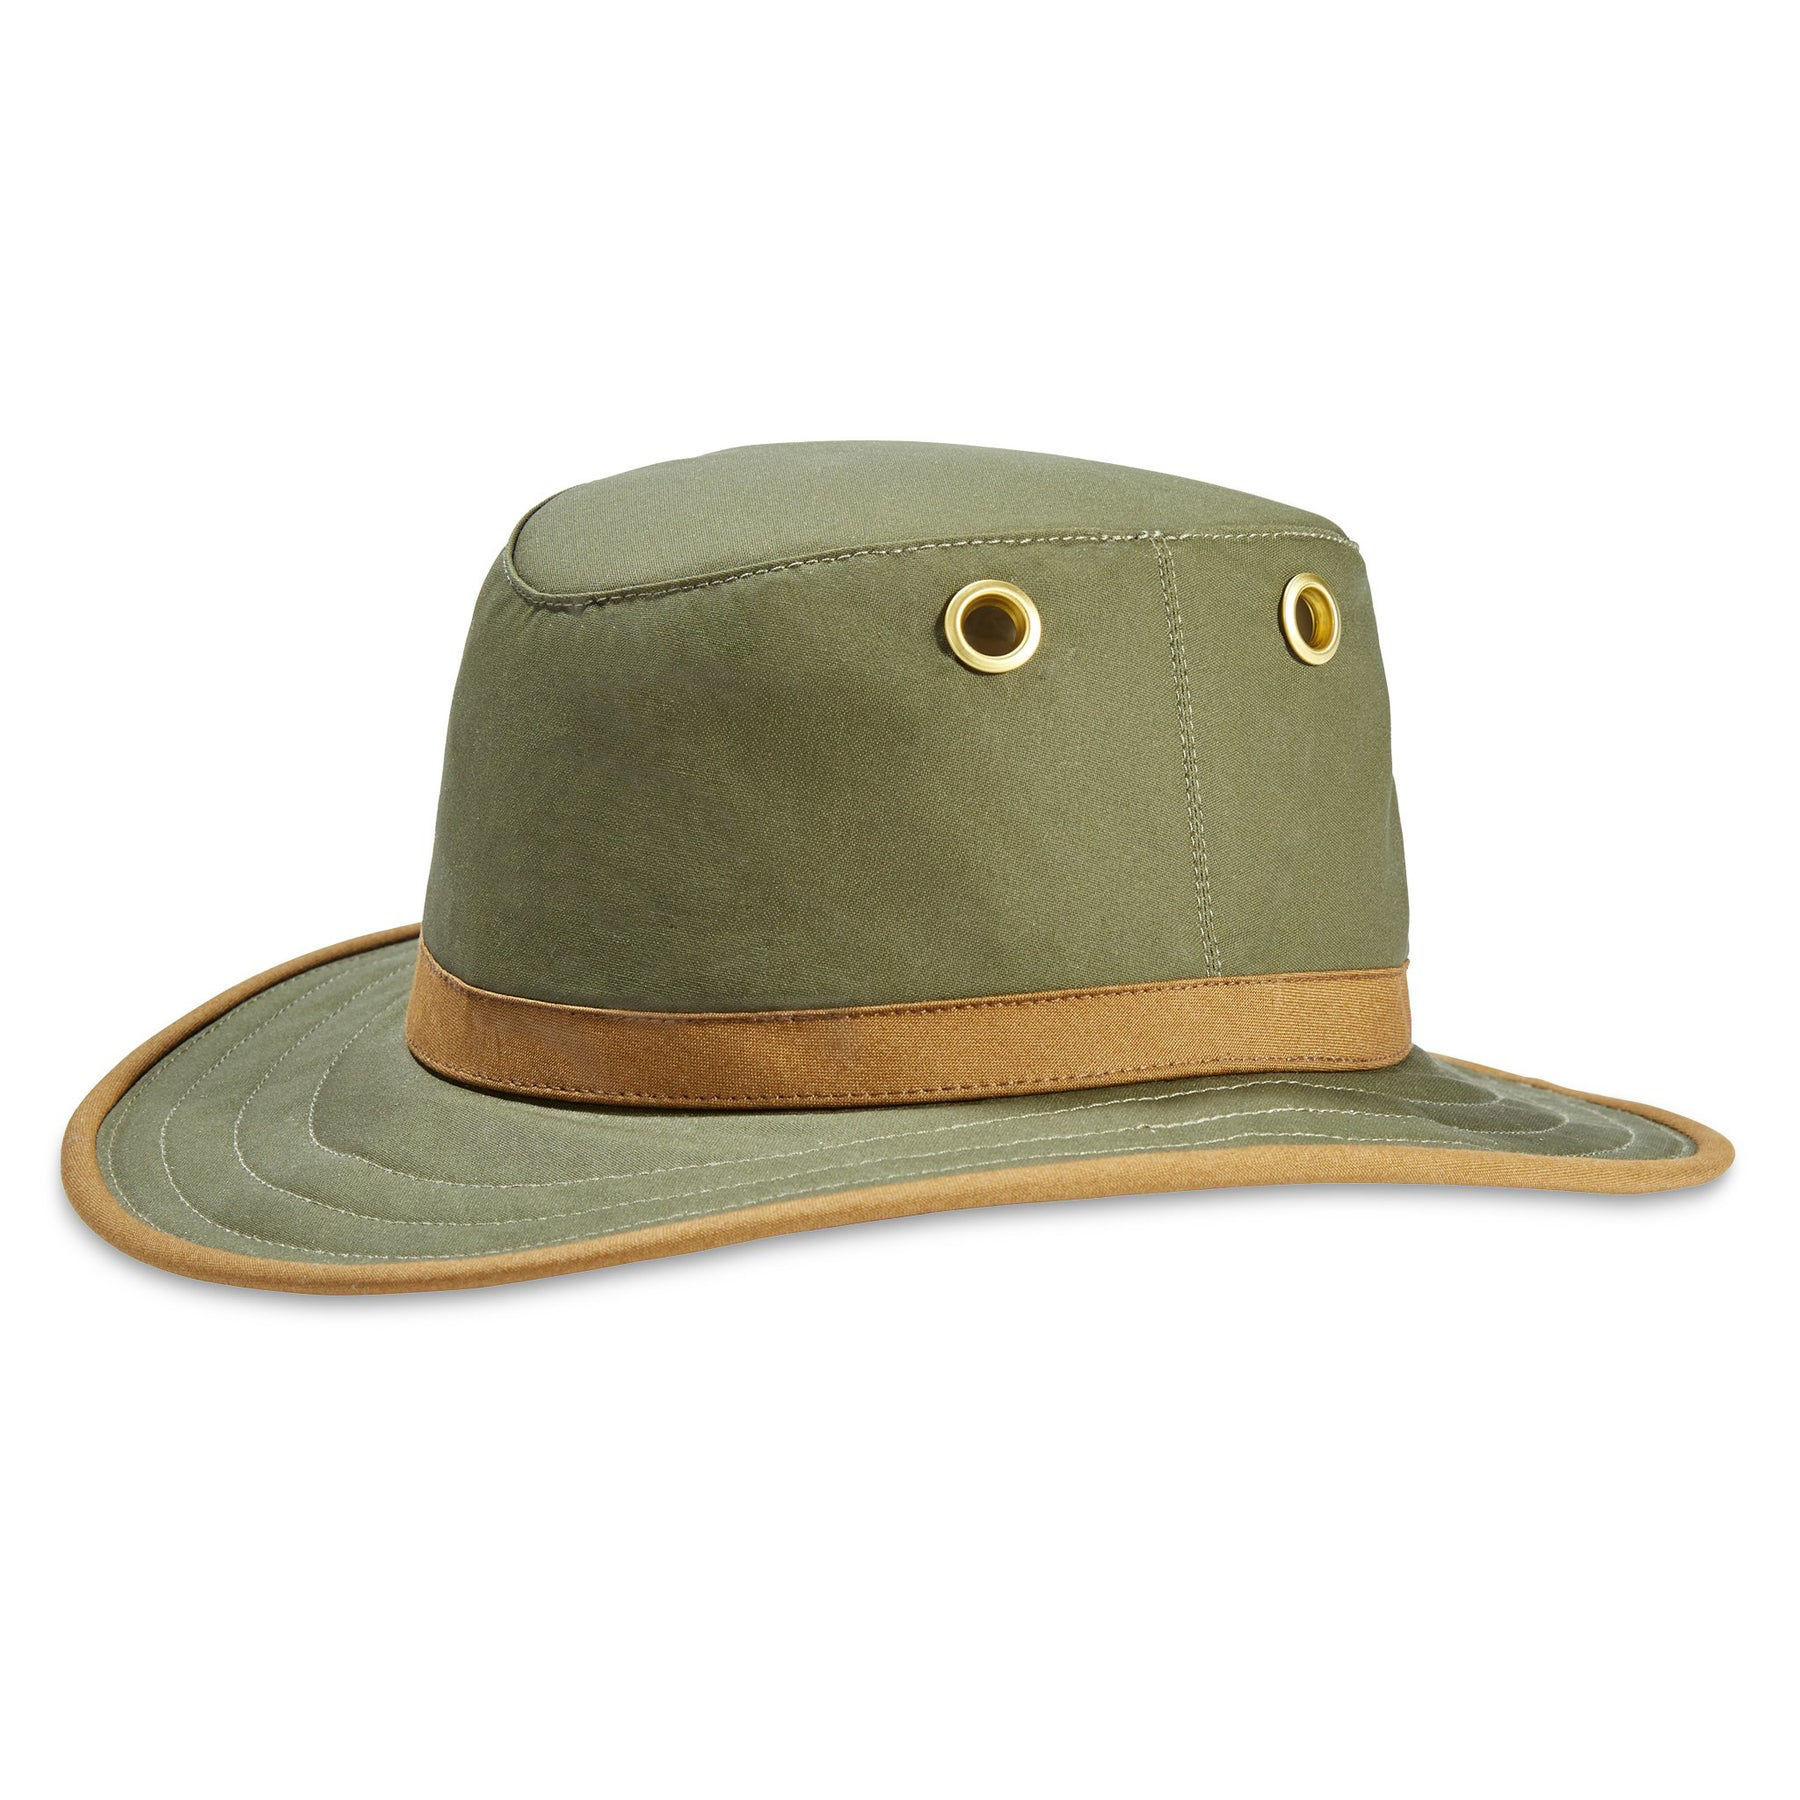 Tilley TWC7 Outback Waxed Cotton Hat in Green / Tan